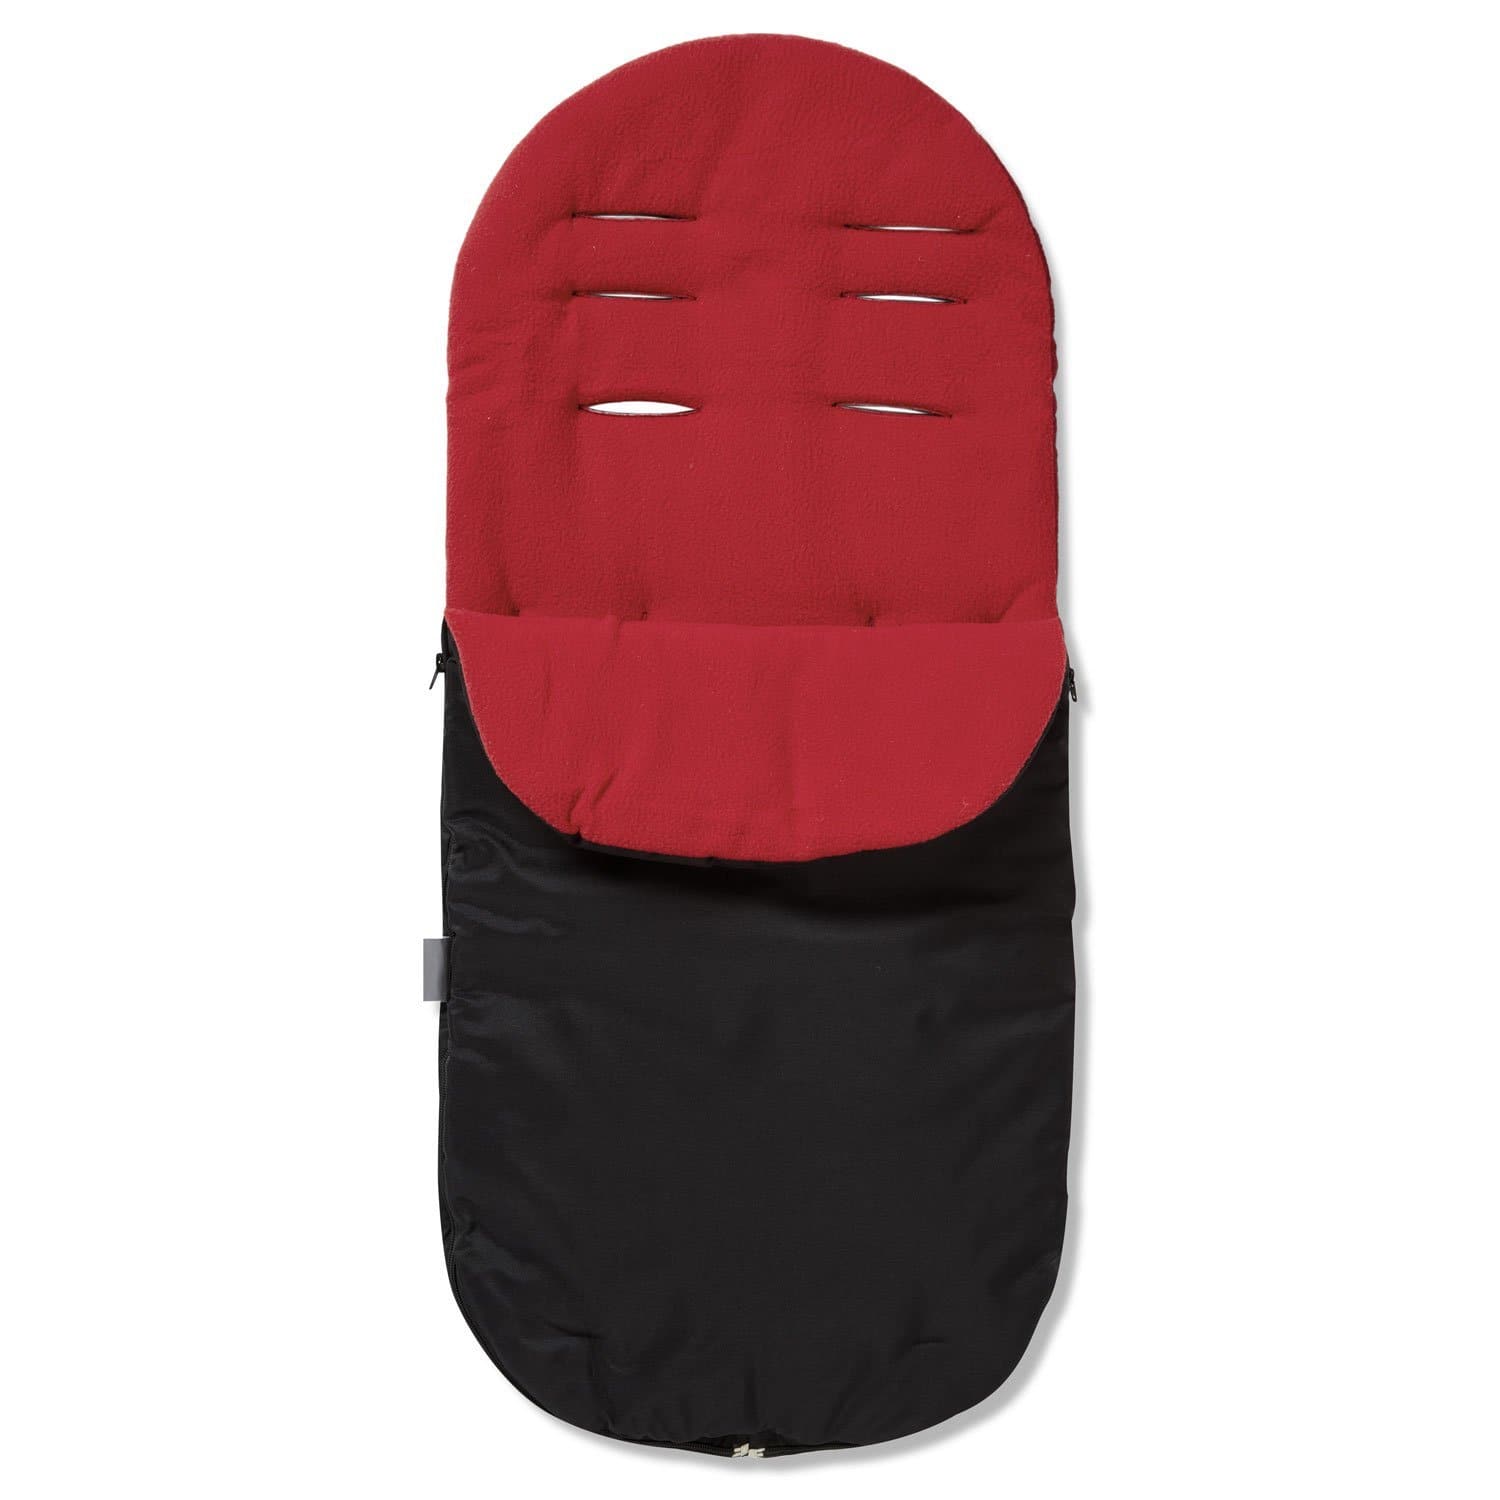 Footmuff / Cosy Toes Compatible with Brevi - Red / Fits All Models | For Your Little One